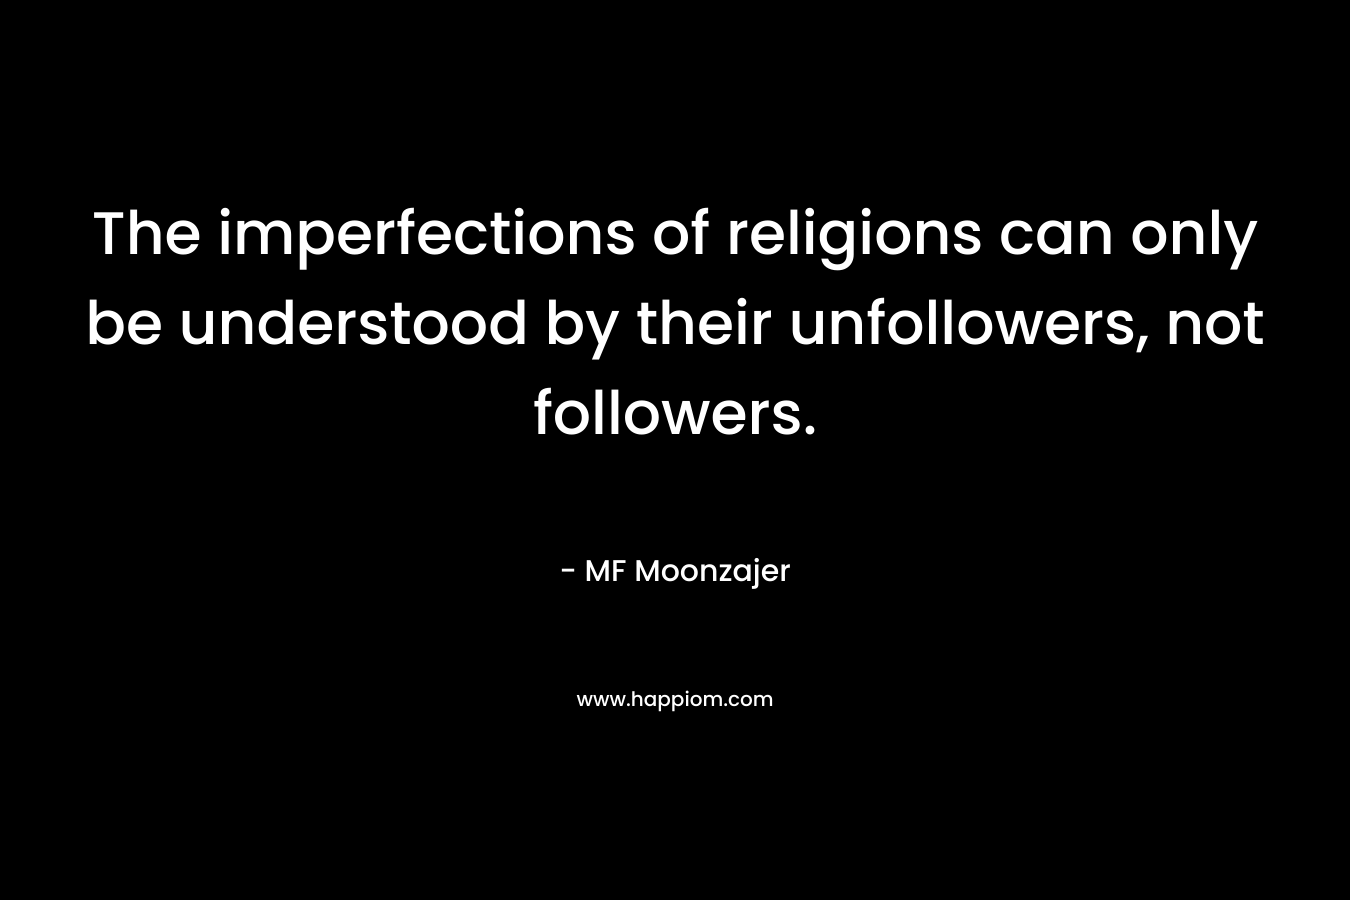 The imperfections of religions can only be understood by their unfollowers, not followers. – MF Moonzajer